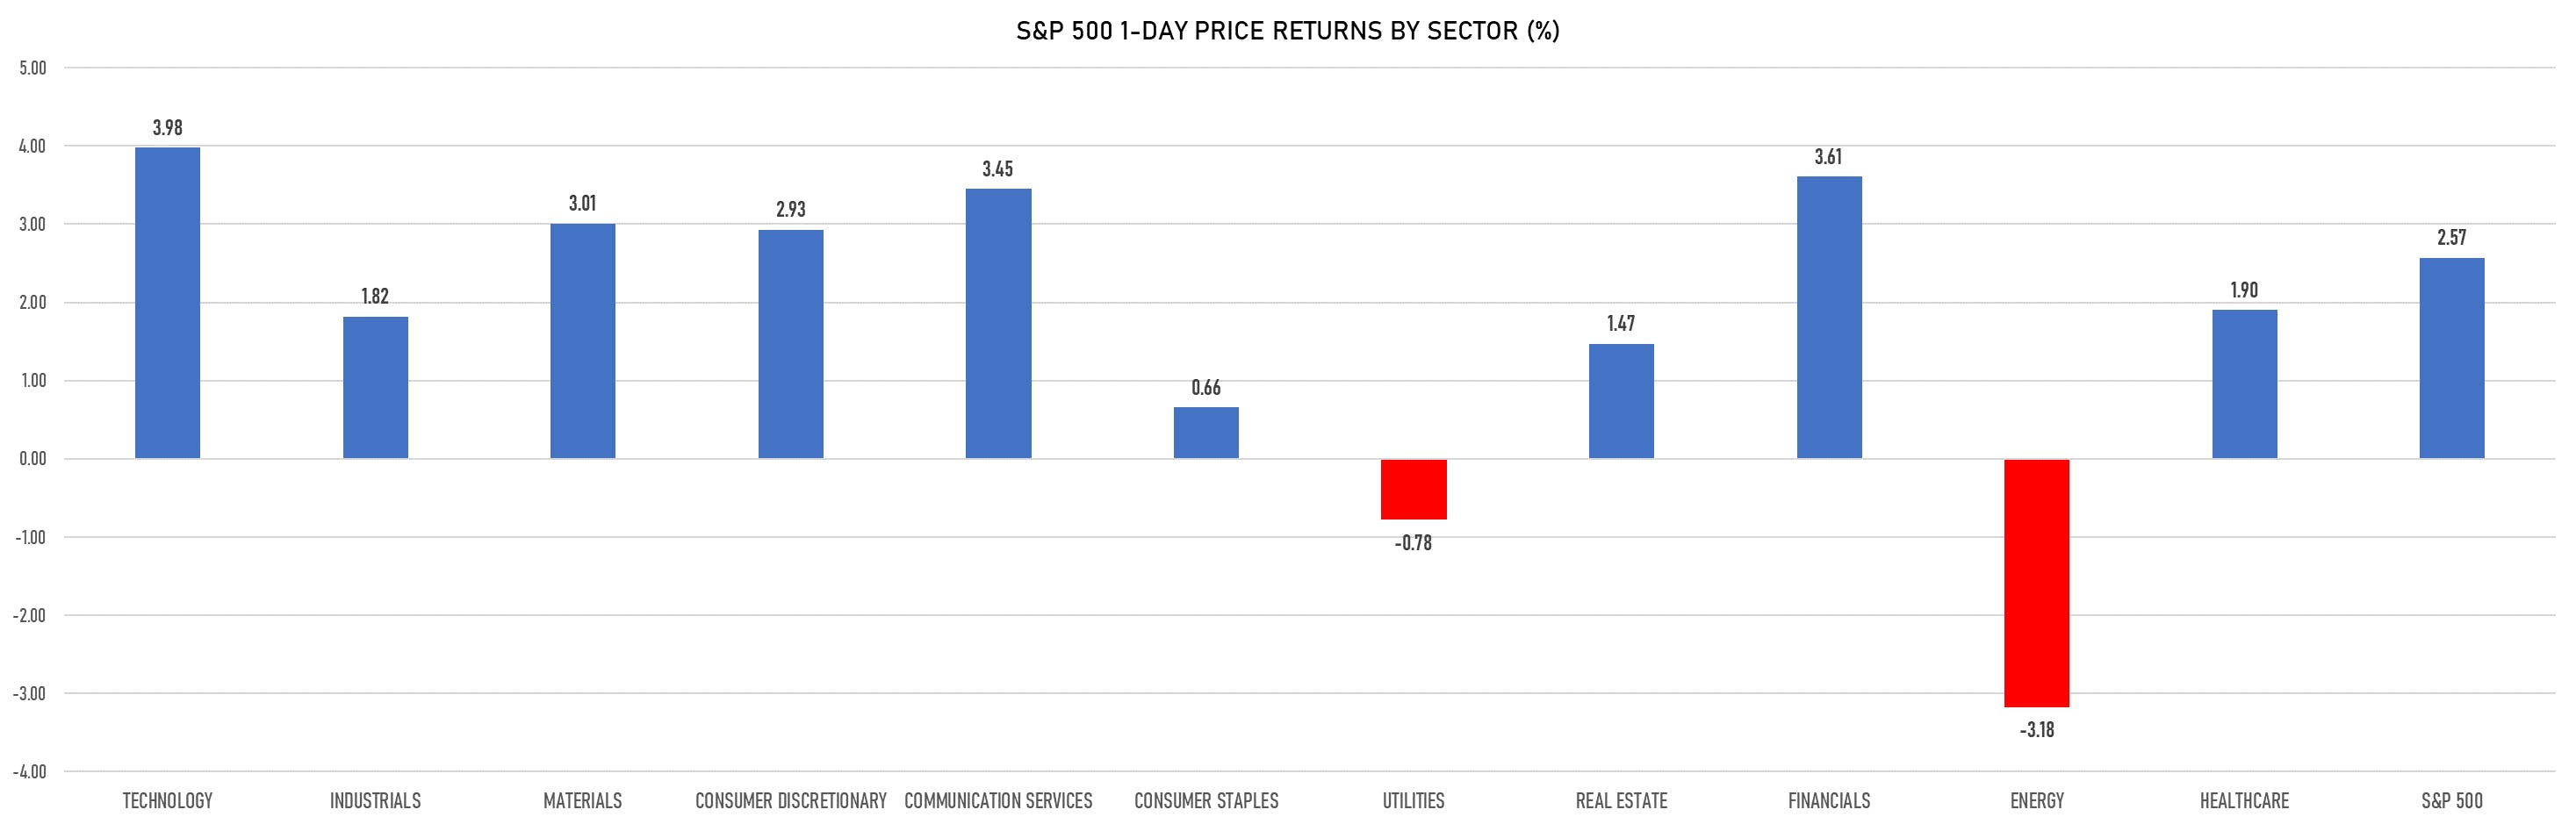 S&P 500 1-Day Return By Sector | Sources: phipost.com, Refinitiv data